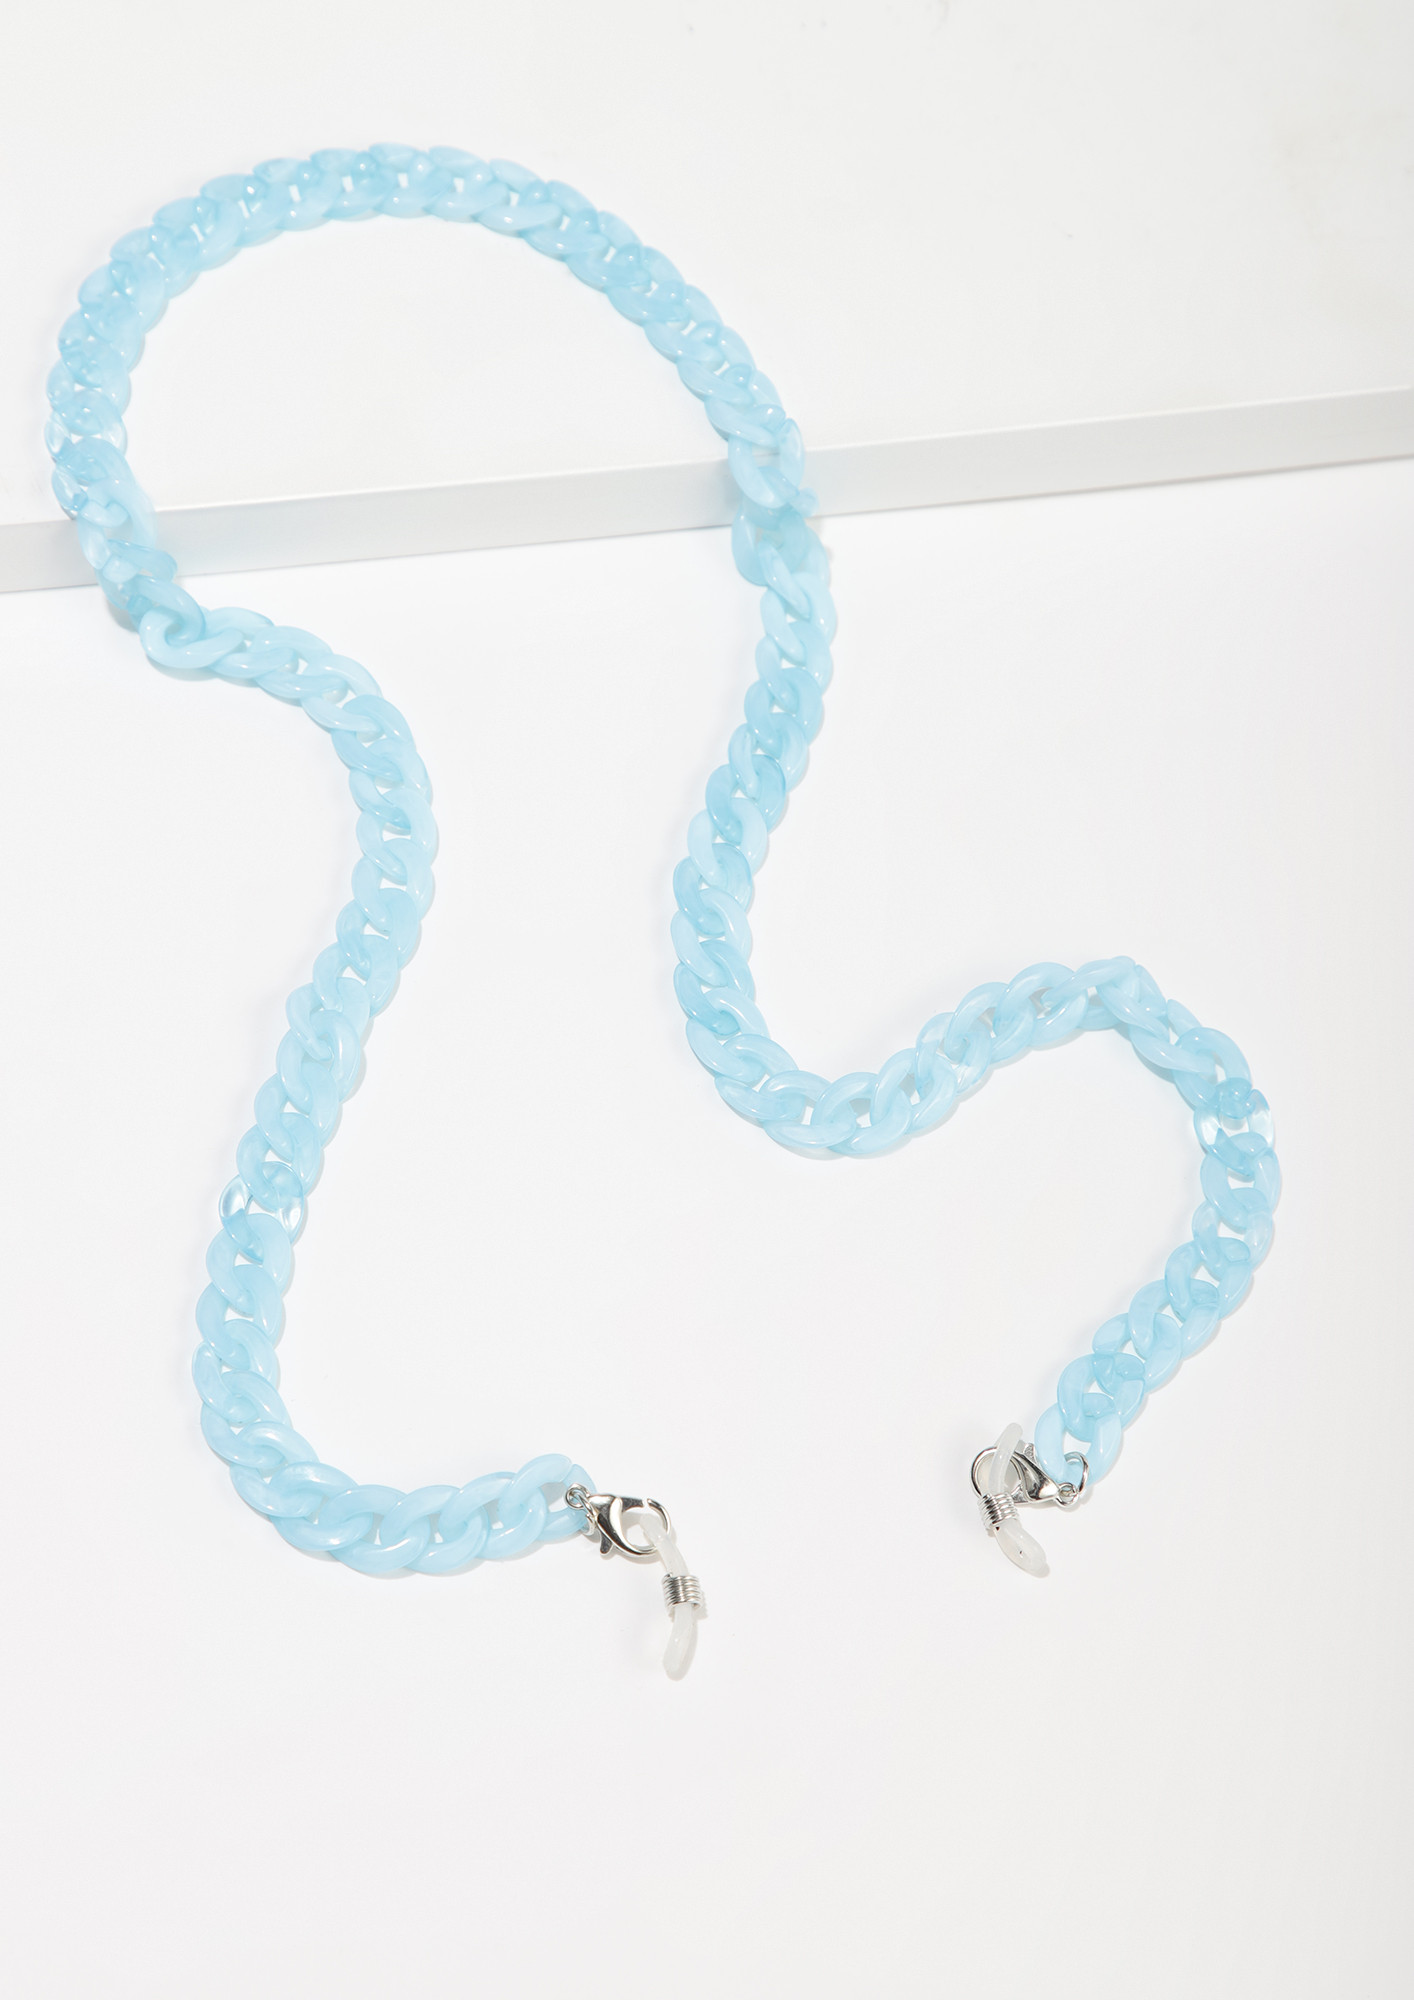 ALL STRINGS ATTACHED BLUE CHAIN